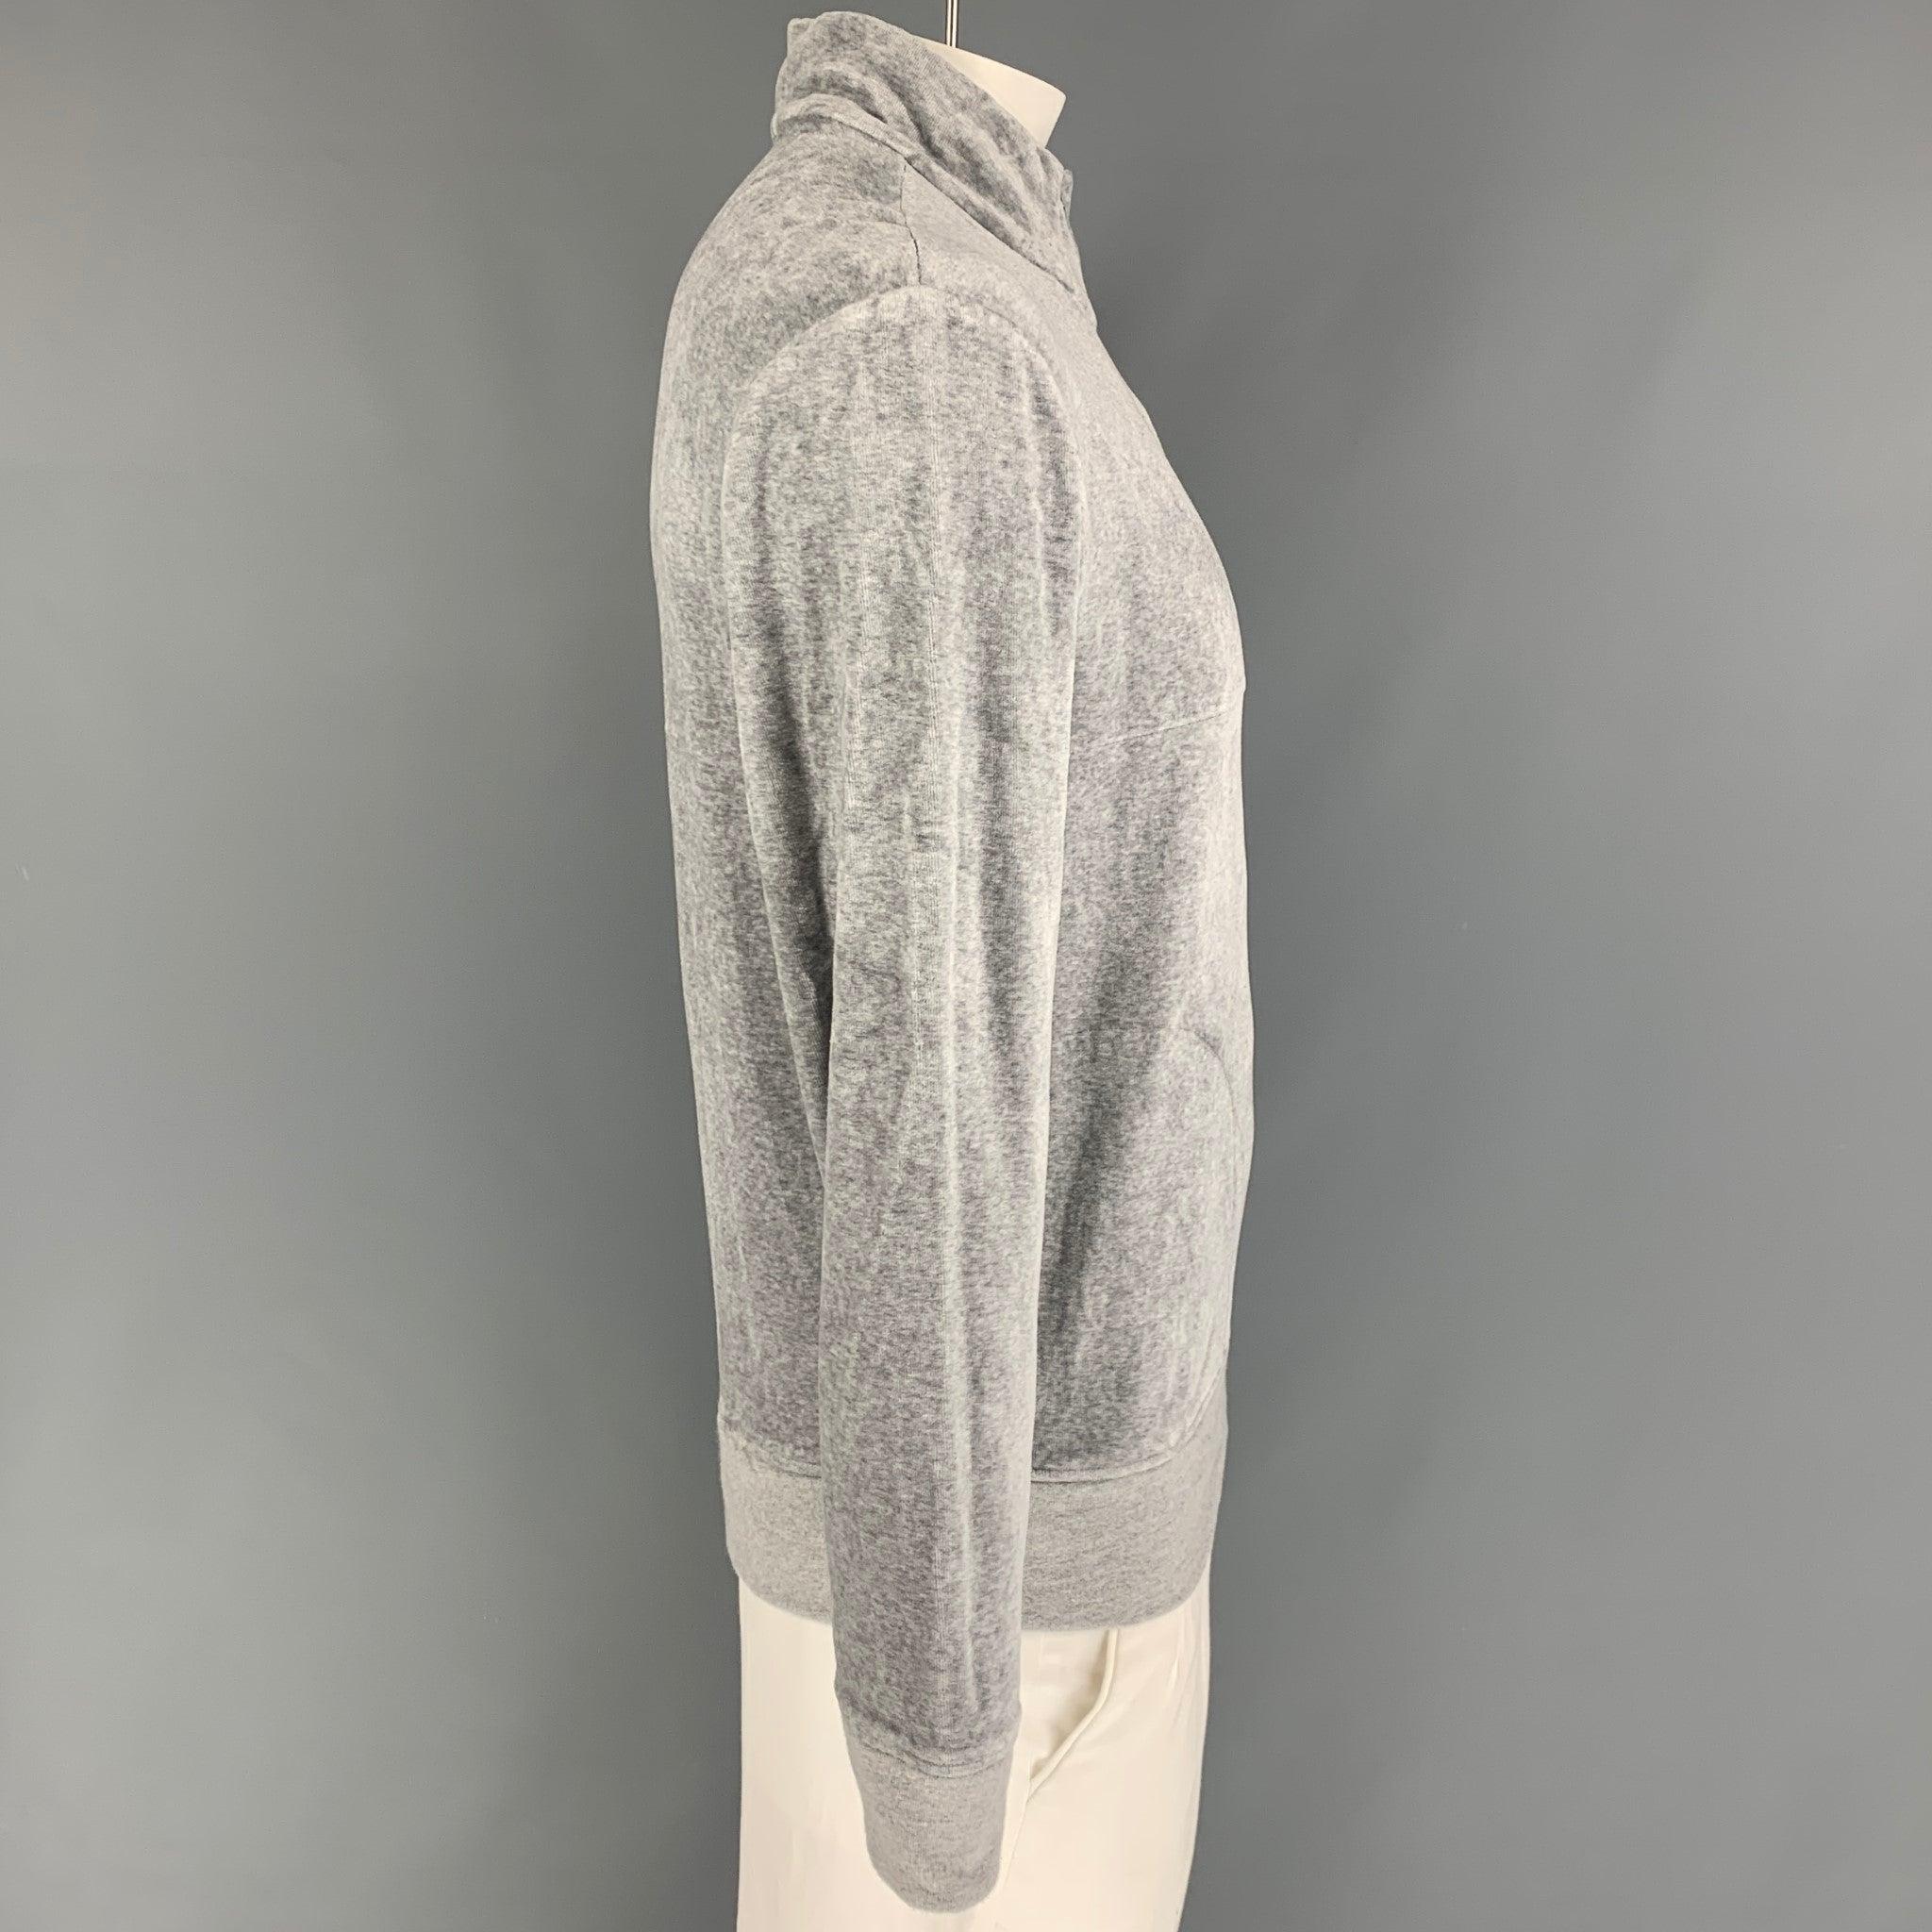 BARNEY'S NEW YORK sweatshirt comes in a grey cotton / modal featuring a high collar, slit pockets, and a half zip closure.
 Very Good
 Pre-Owned Condition. 
 

 Marked:  L  
 

 Measurements: 
  
 Shoulder: 20 inches Chest: 42 inches Sleeve: 25.5